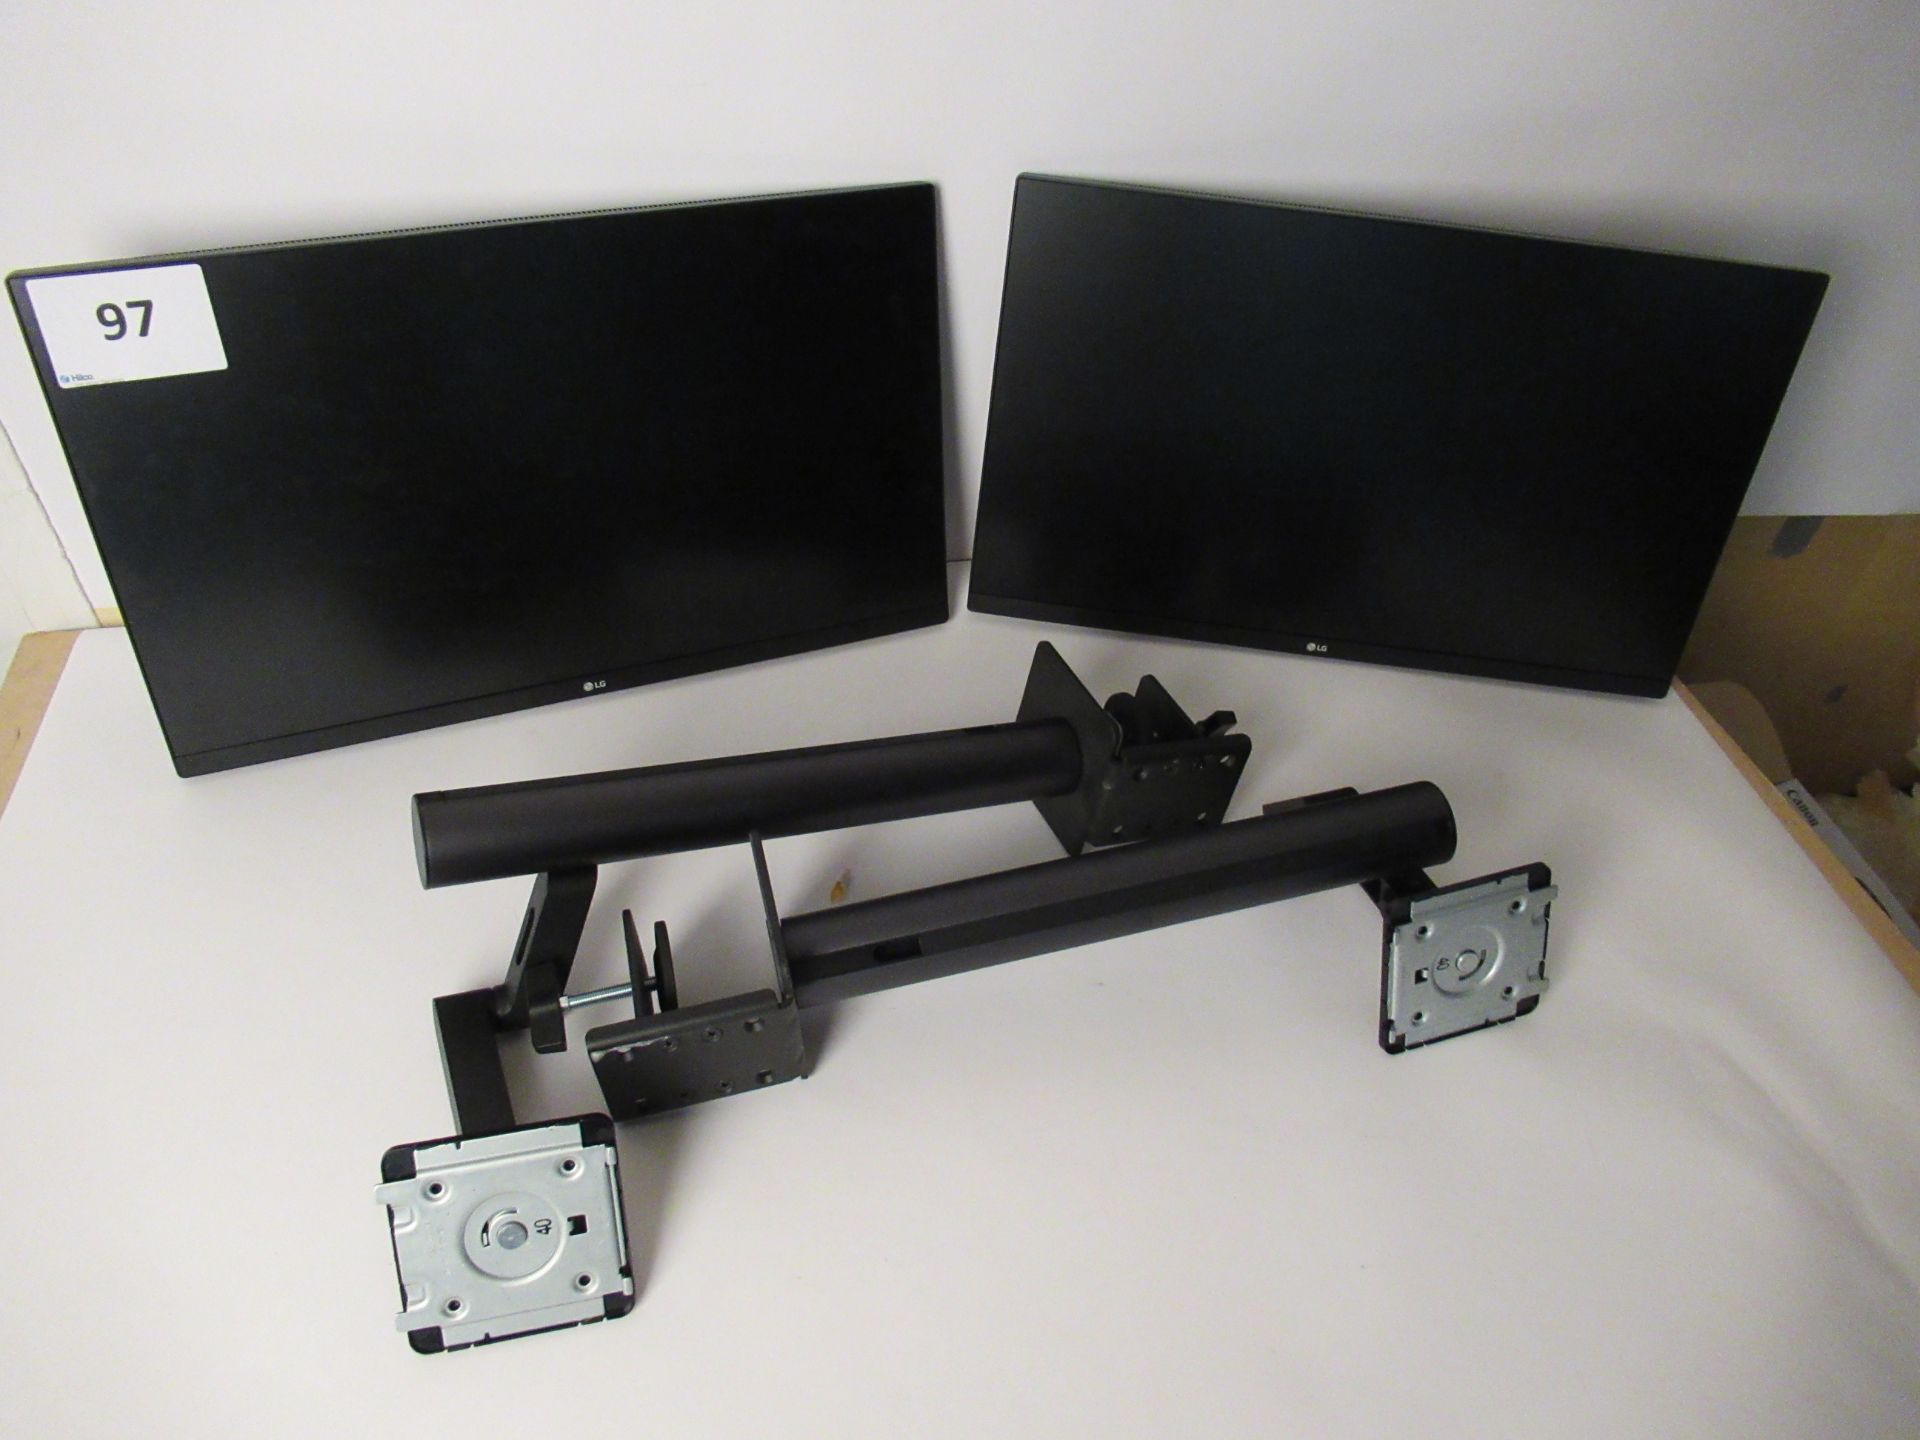 2 LG 27QN880 27 inch Flatscreen Monitors with Desk Arms, without Power leads